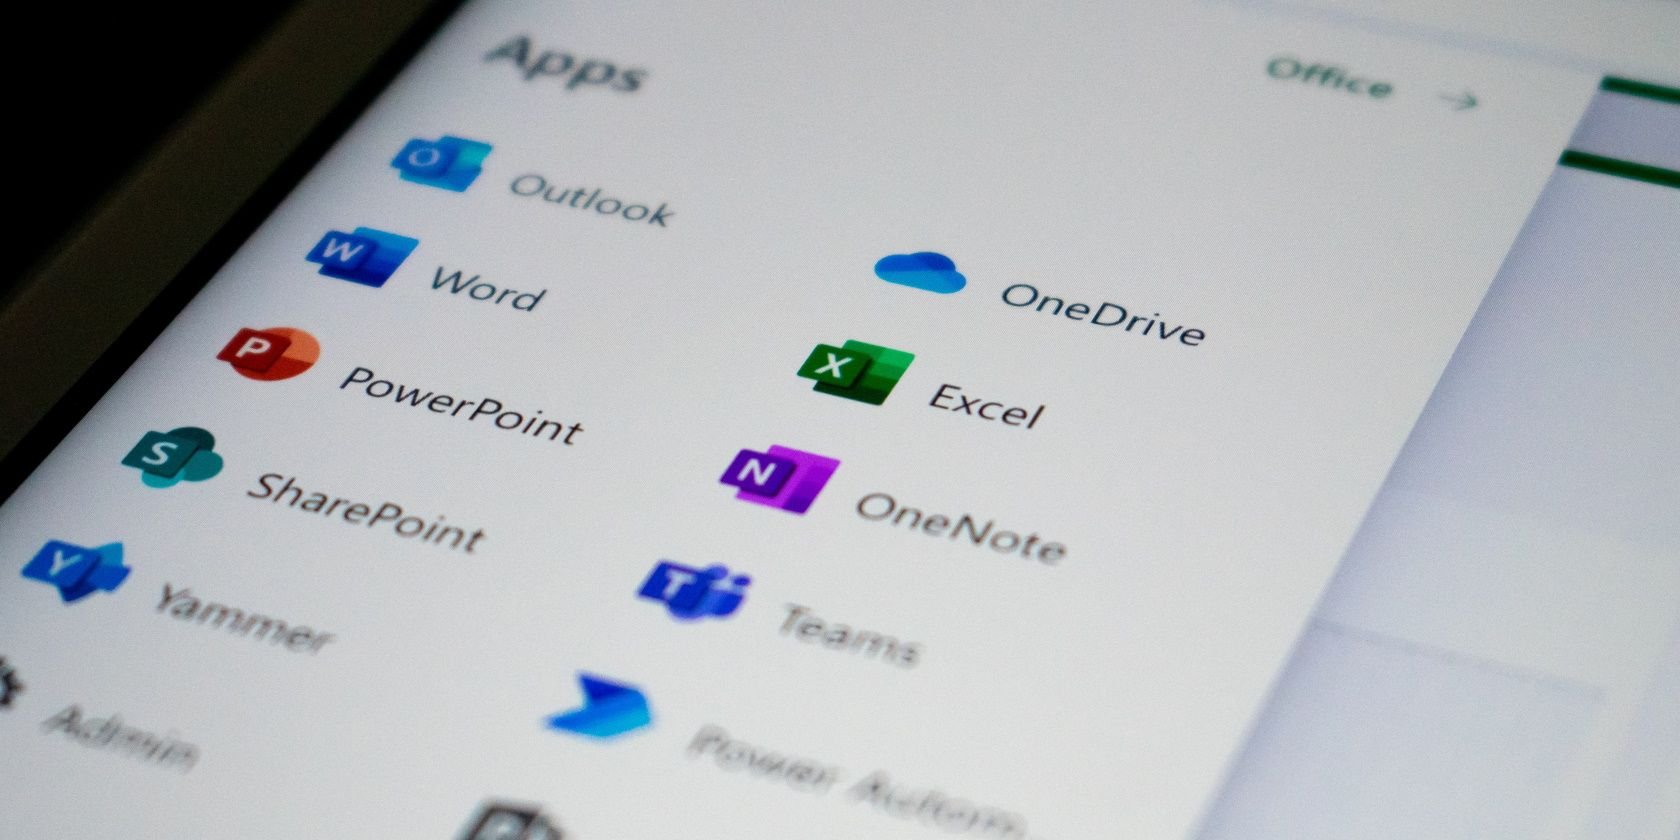 7 Tips for Using Microsoft OneNote as Your To-Do List